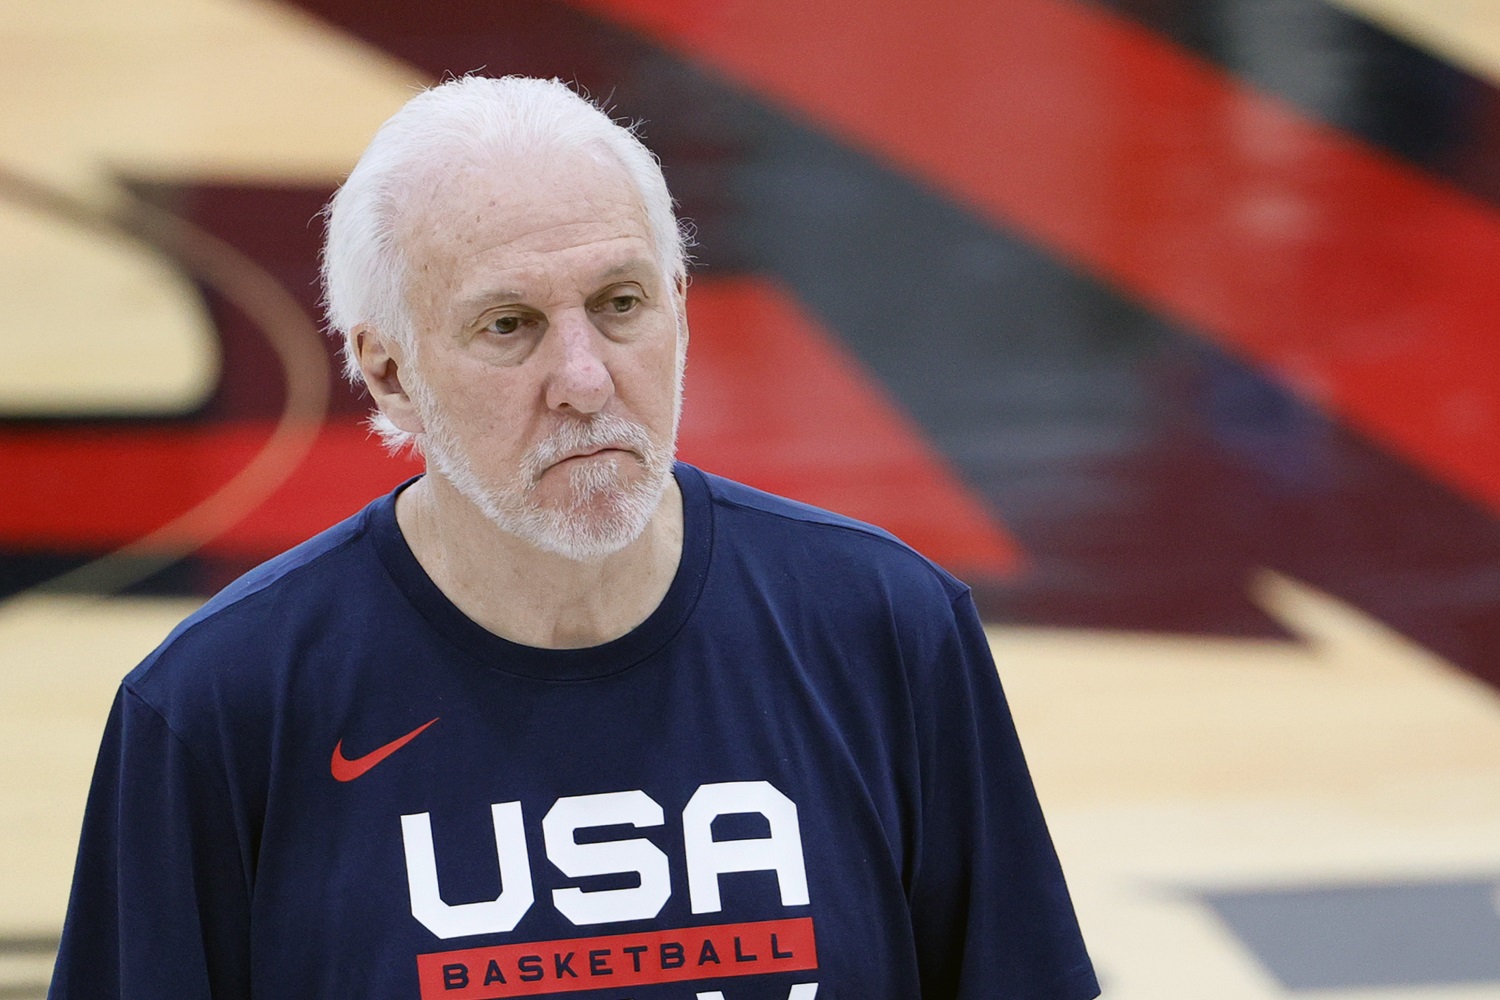 Head coach Gregg Popovich watches over practice at the Mendenhall Center at UNLV as Team USA gets ready for the Tokyo Olympics. | Ethan Miller/Getty Images